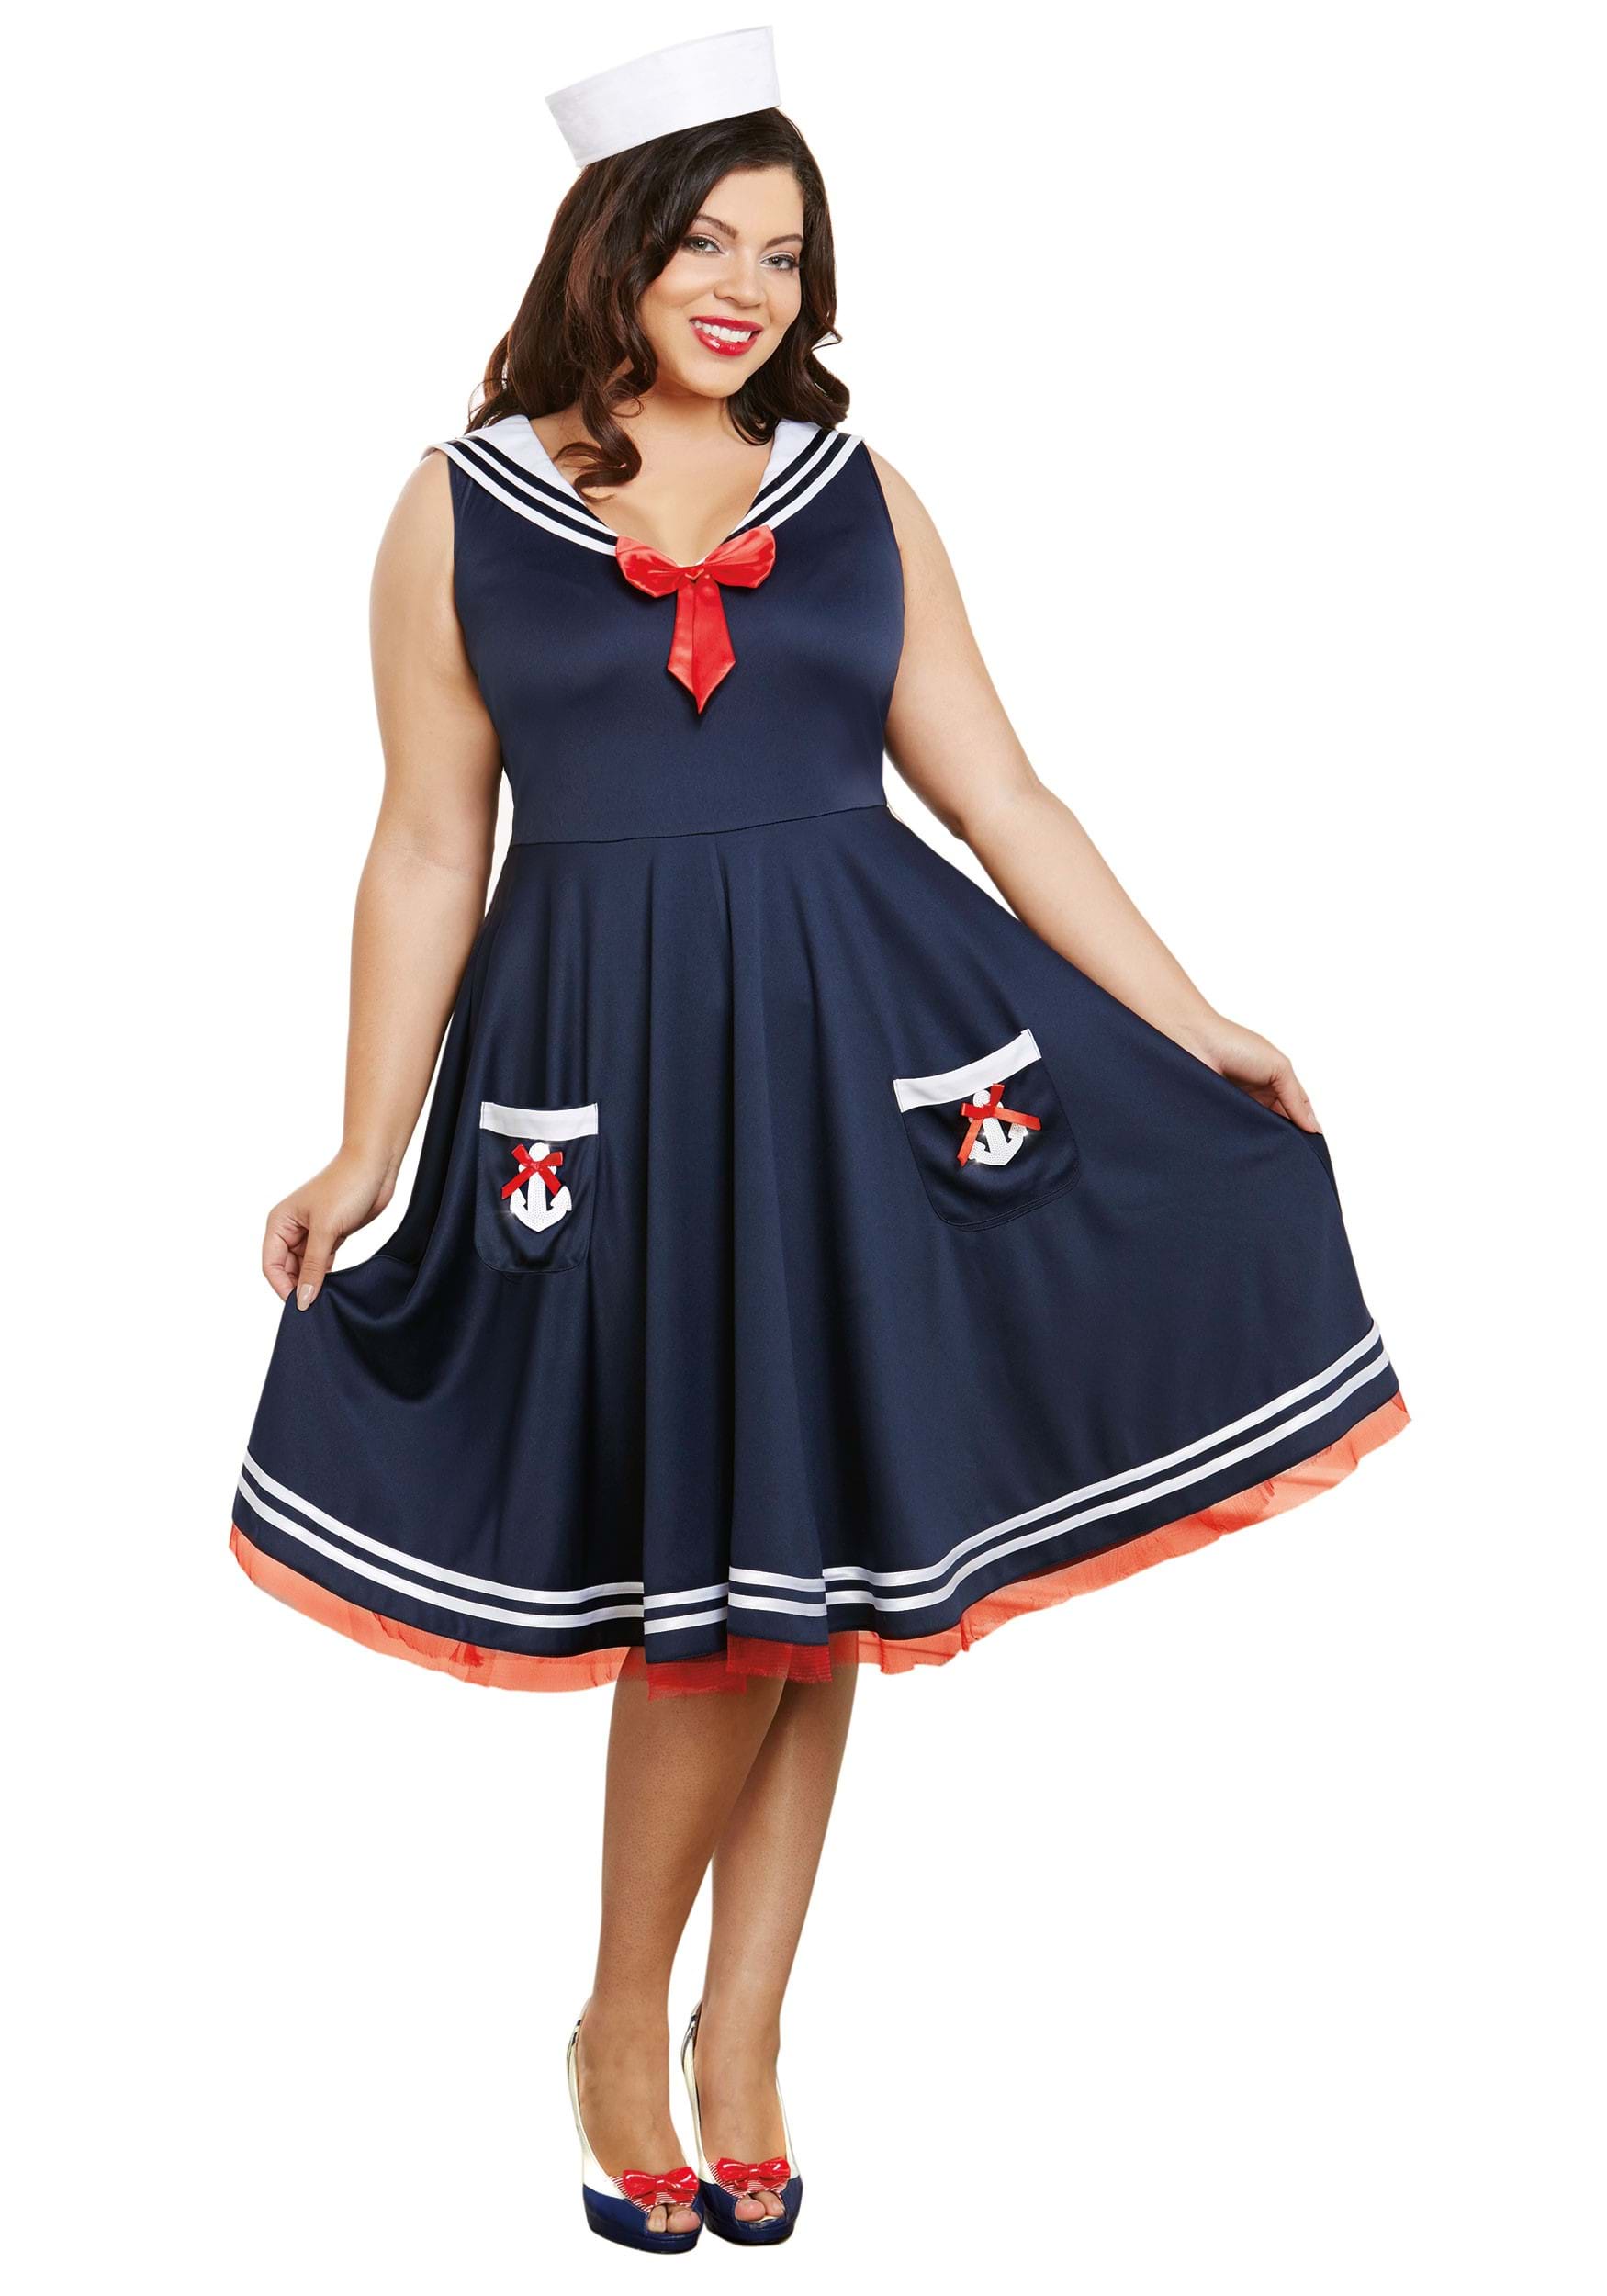 Plus Size Dresses  Gorgeous Plus Size Outfits for all Occasions